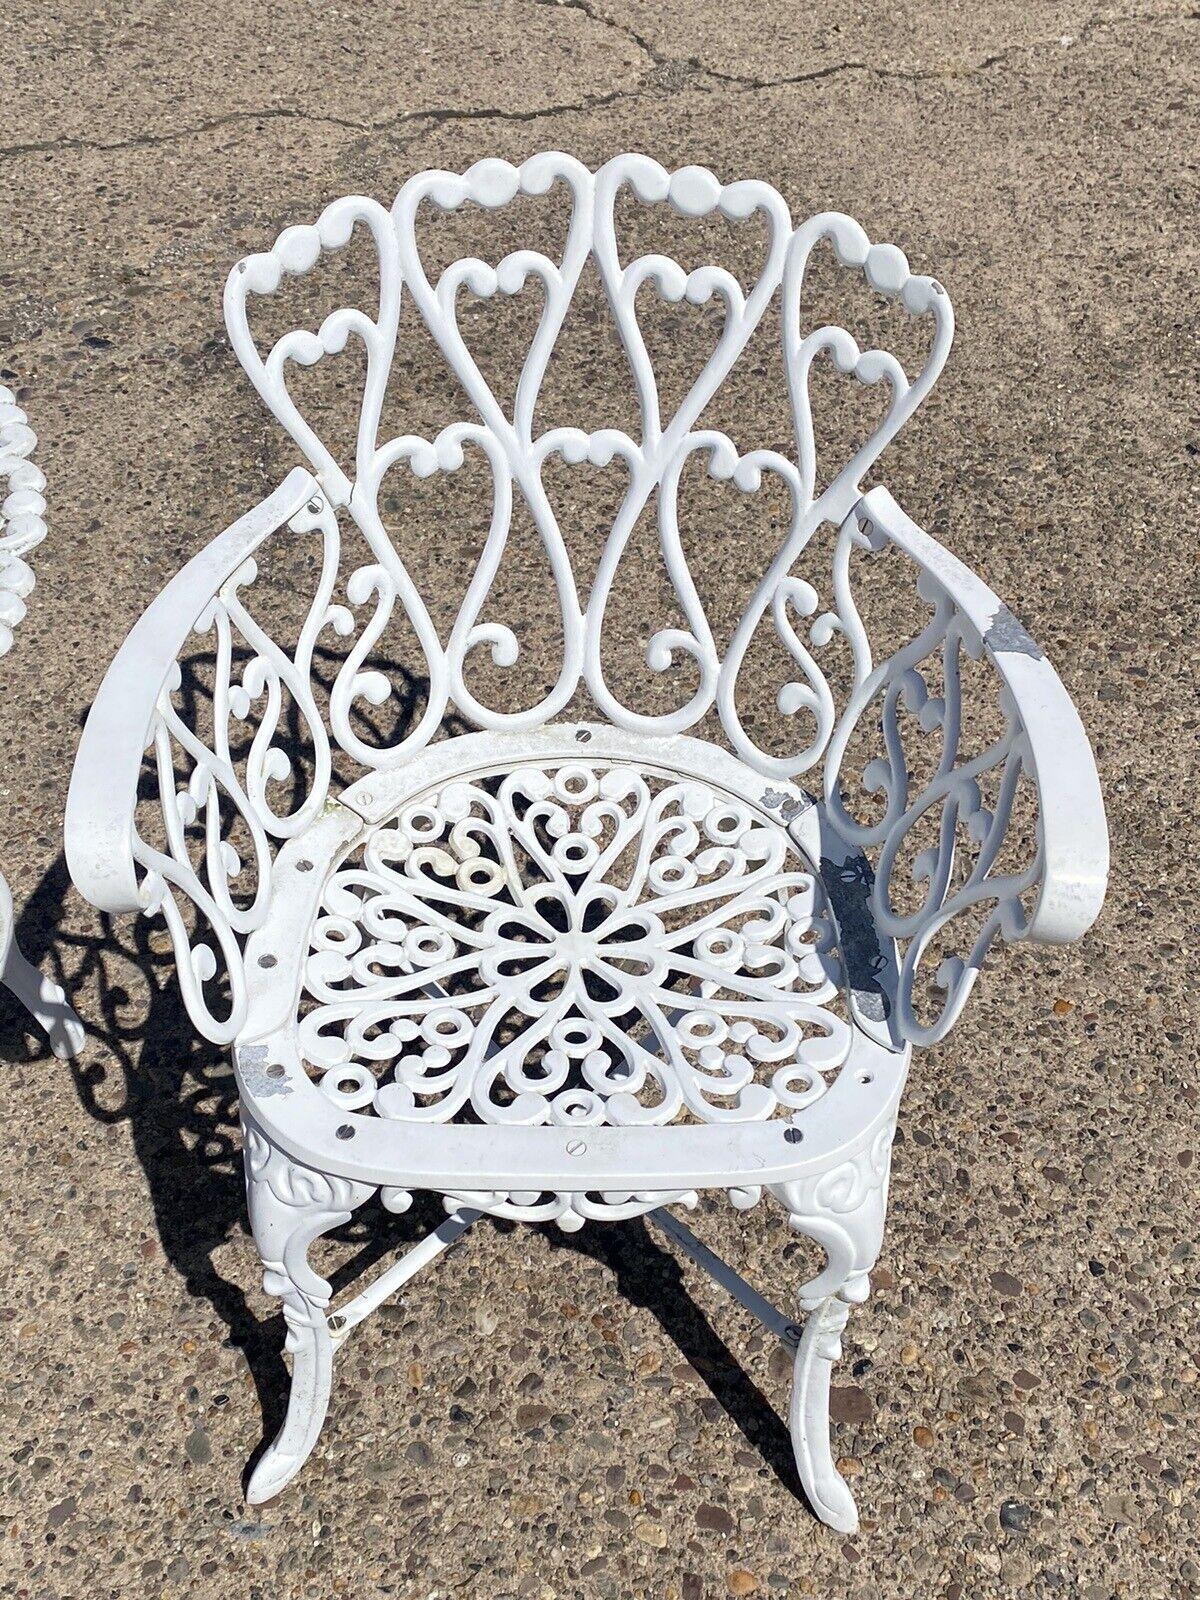 Victorian Style Cast Aluminum Scrolling Heart Back Garden Patio 3 Pc Bistro Set. Item features 2 heart back chairs, 1 round table with umbellar hold, scrollwork throughout, white painted finish. Circa Late 20th Century.
Measurements: 
Chairs: 31